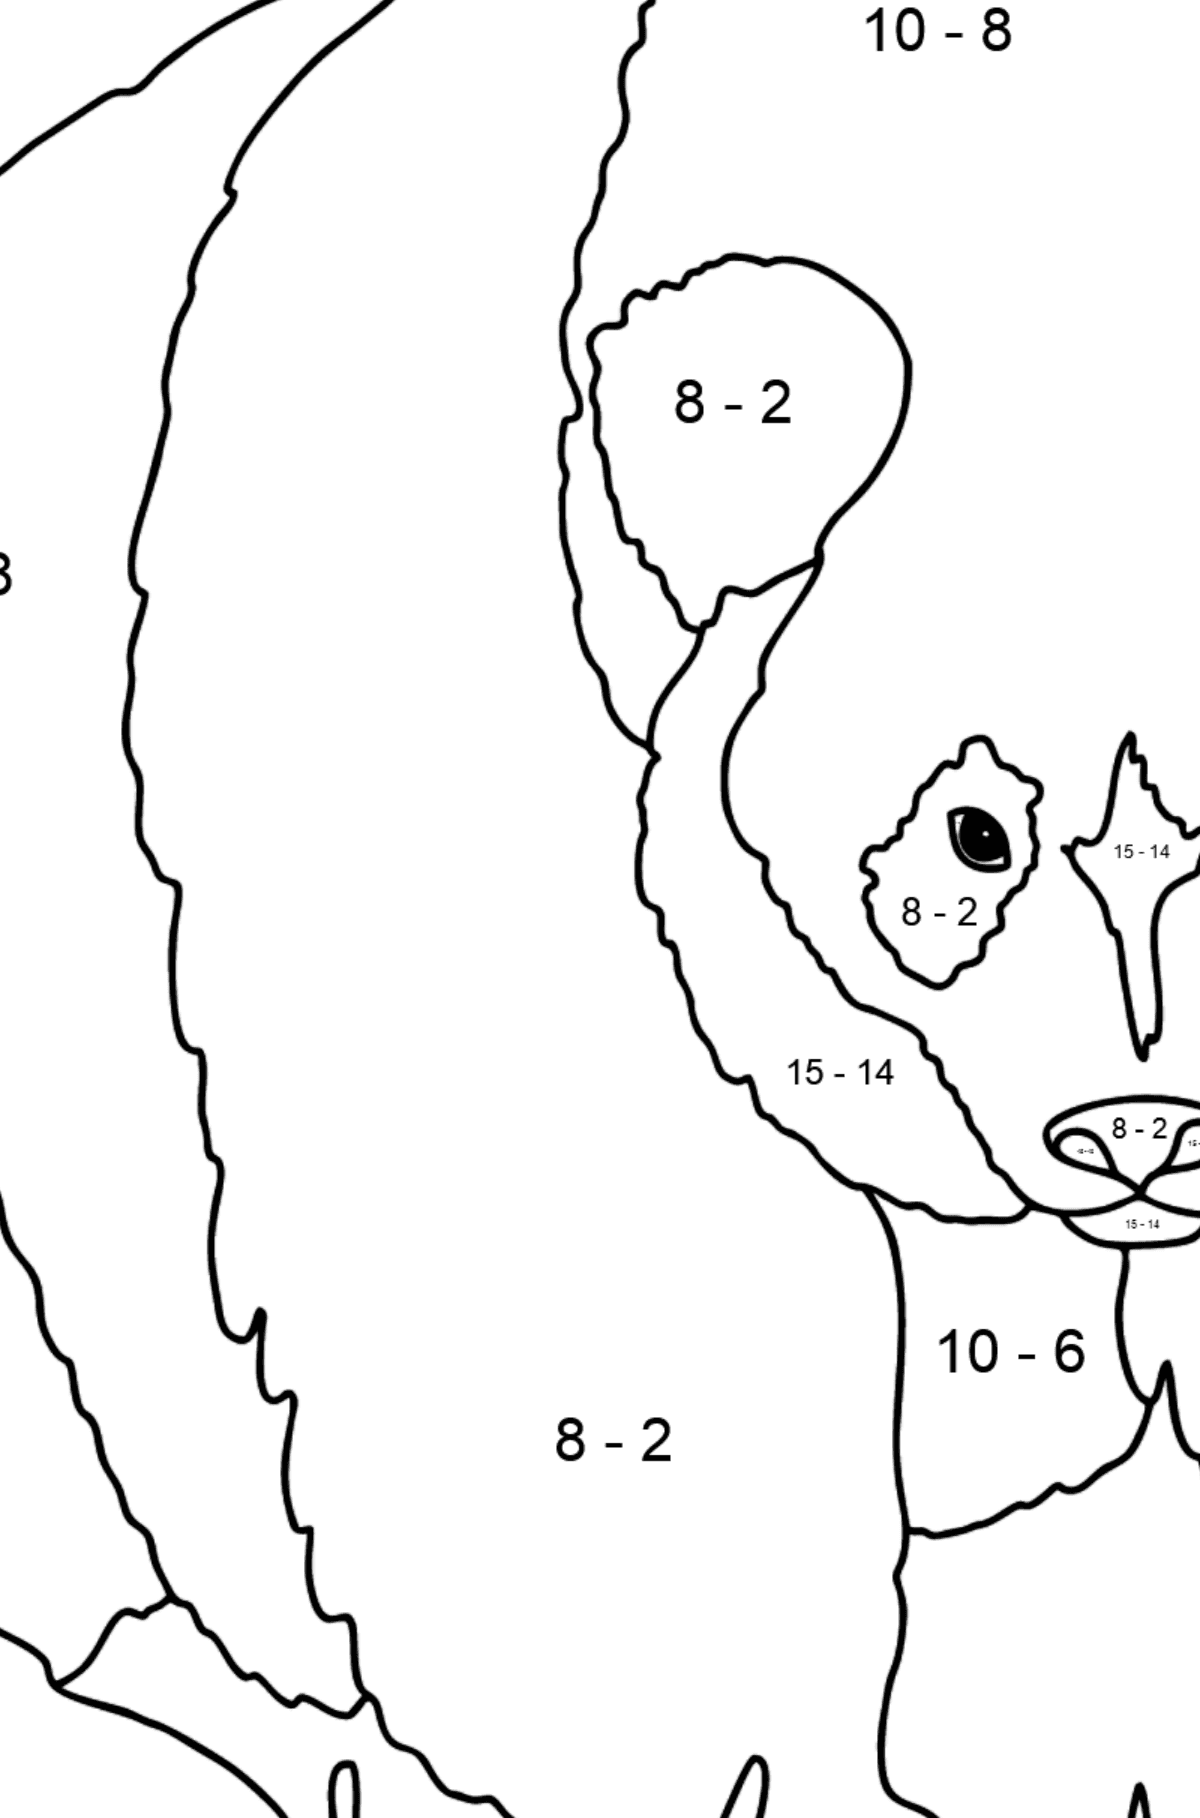 Coloring Page - A Panda is Preparing for Defense - Math Coloring - Subtraction for Kids